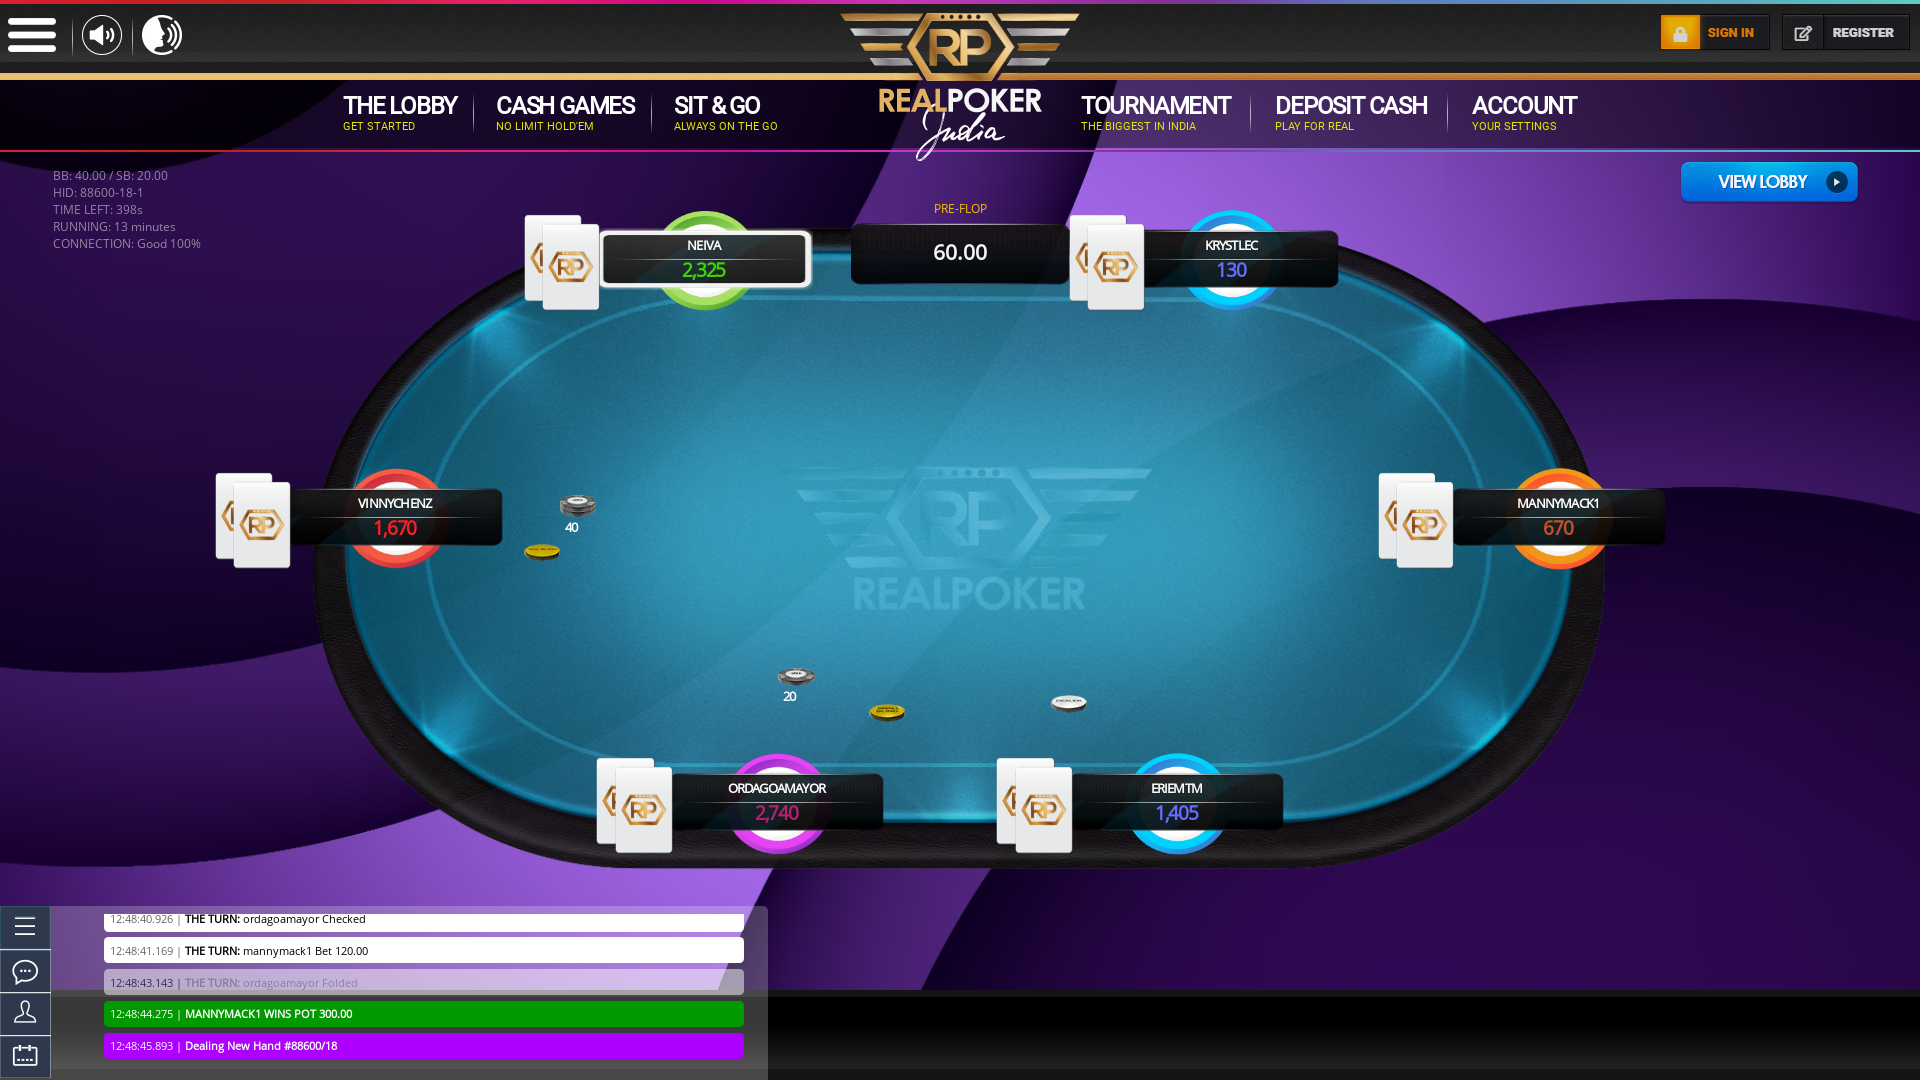 Real poker 6 player table in the 13th minute of the match